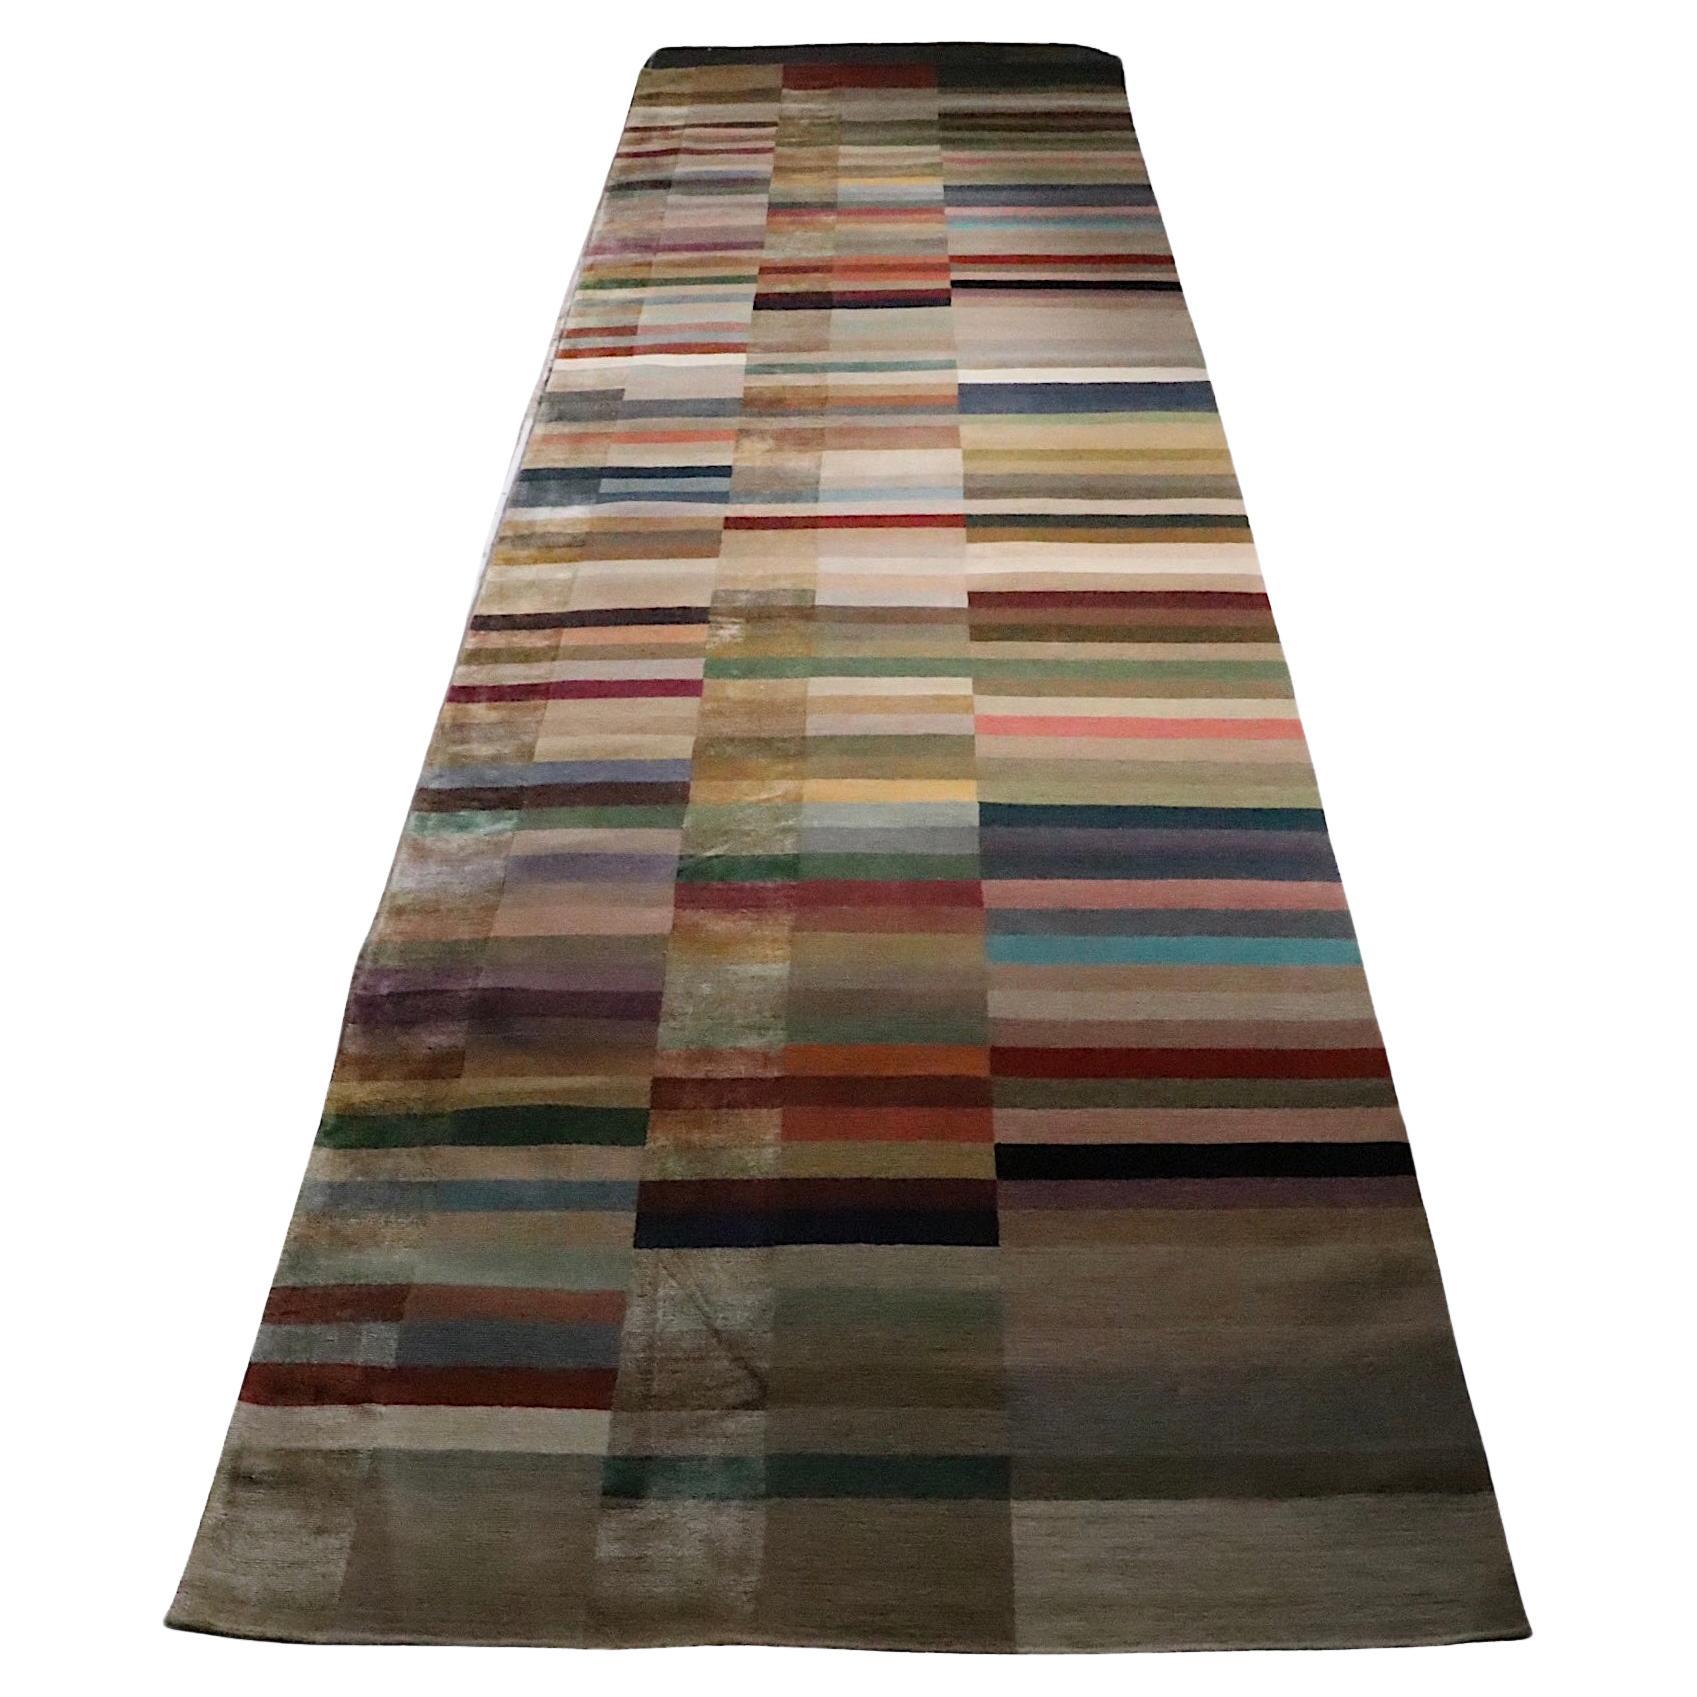 Incredible Spectrum pattern runner made in Nepal for The Rug Company. The carpet features three rows of  solid color blocks, who's warm rich tones exude voguish sophistication. The craftsmanship and quality of workmanship are also extraordinary, the